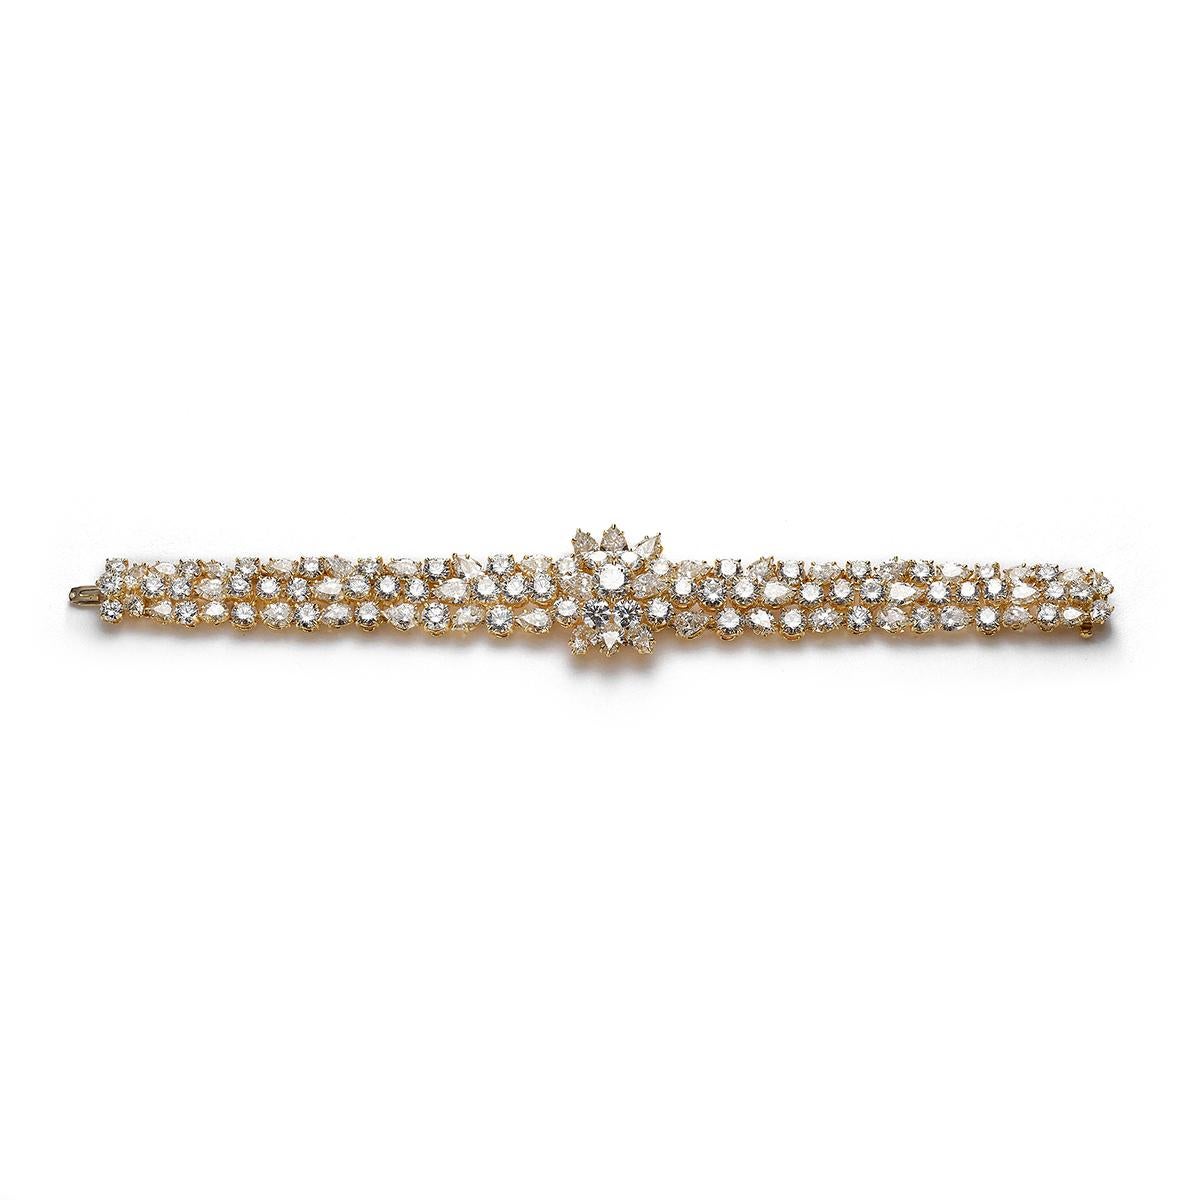 Bracelet in 18kt yellow gold set with one diamond 1.33 cts GVS2 and 103 round and pear-shaped cut diamonds 42.88 cts  